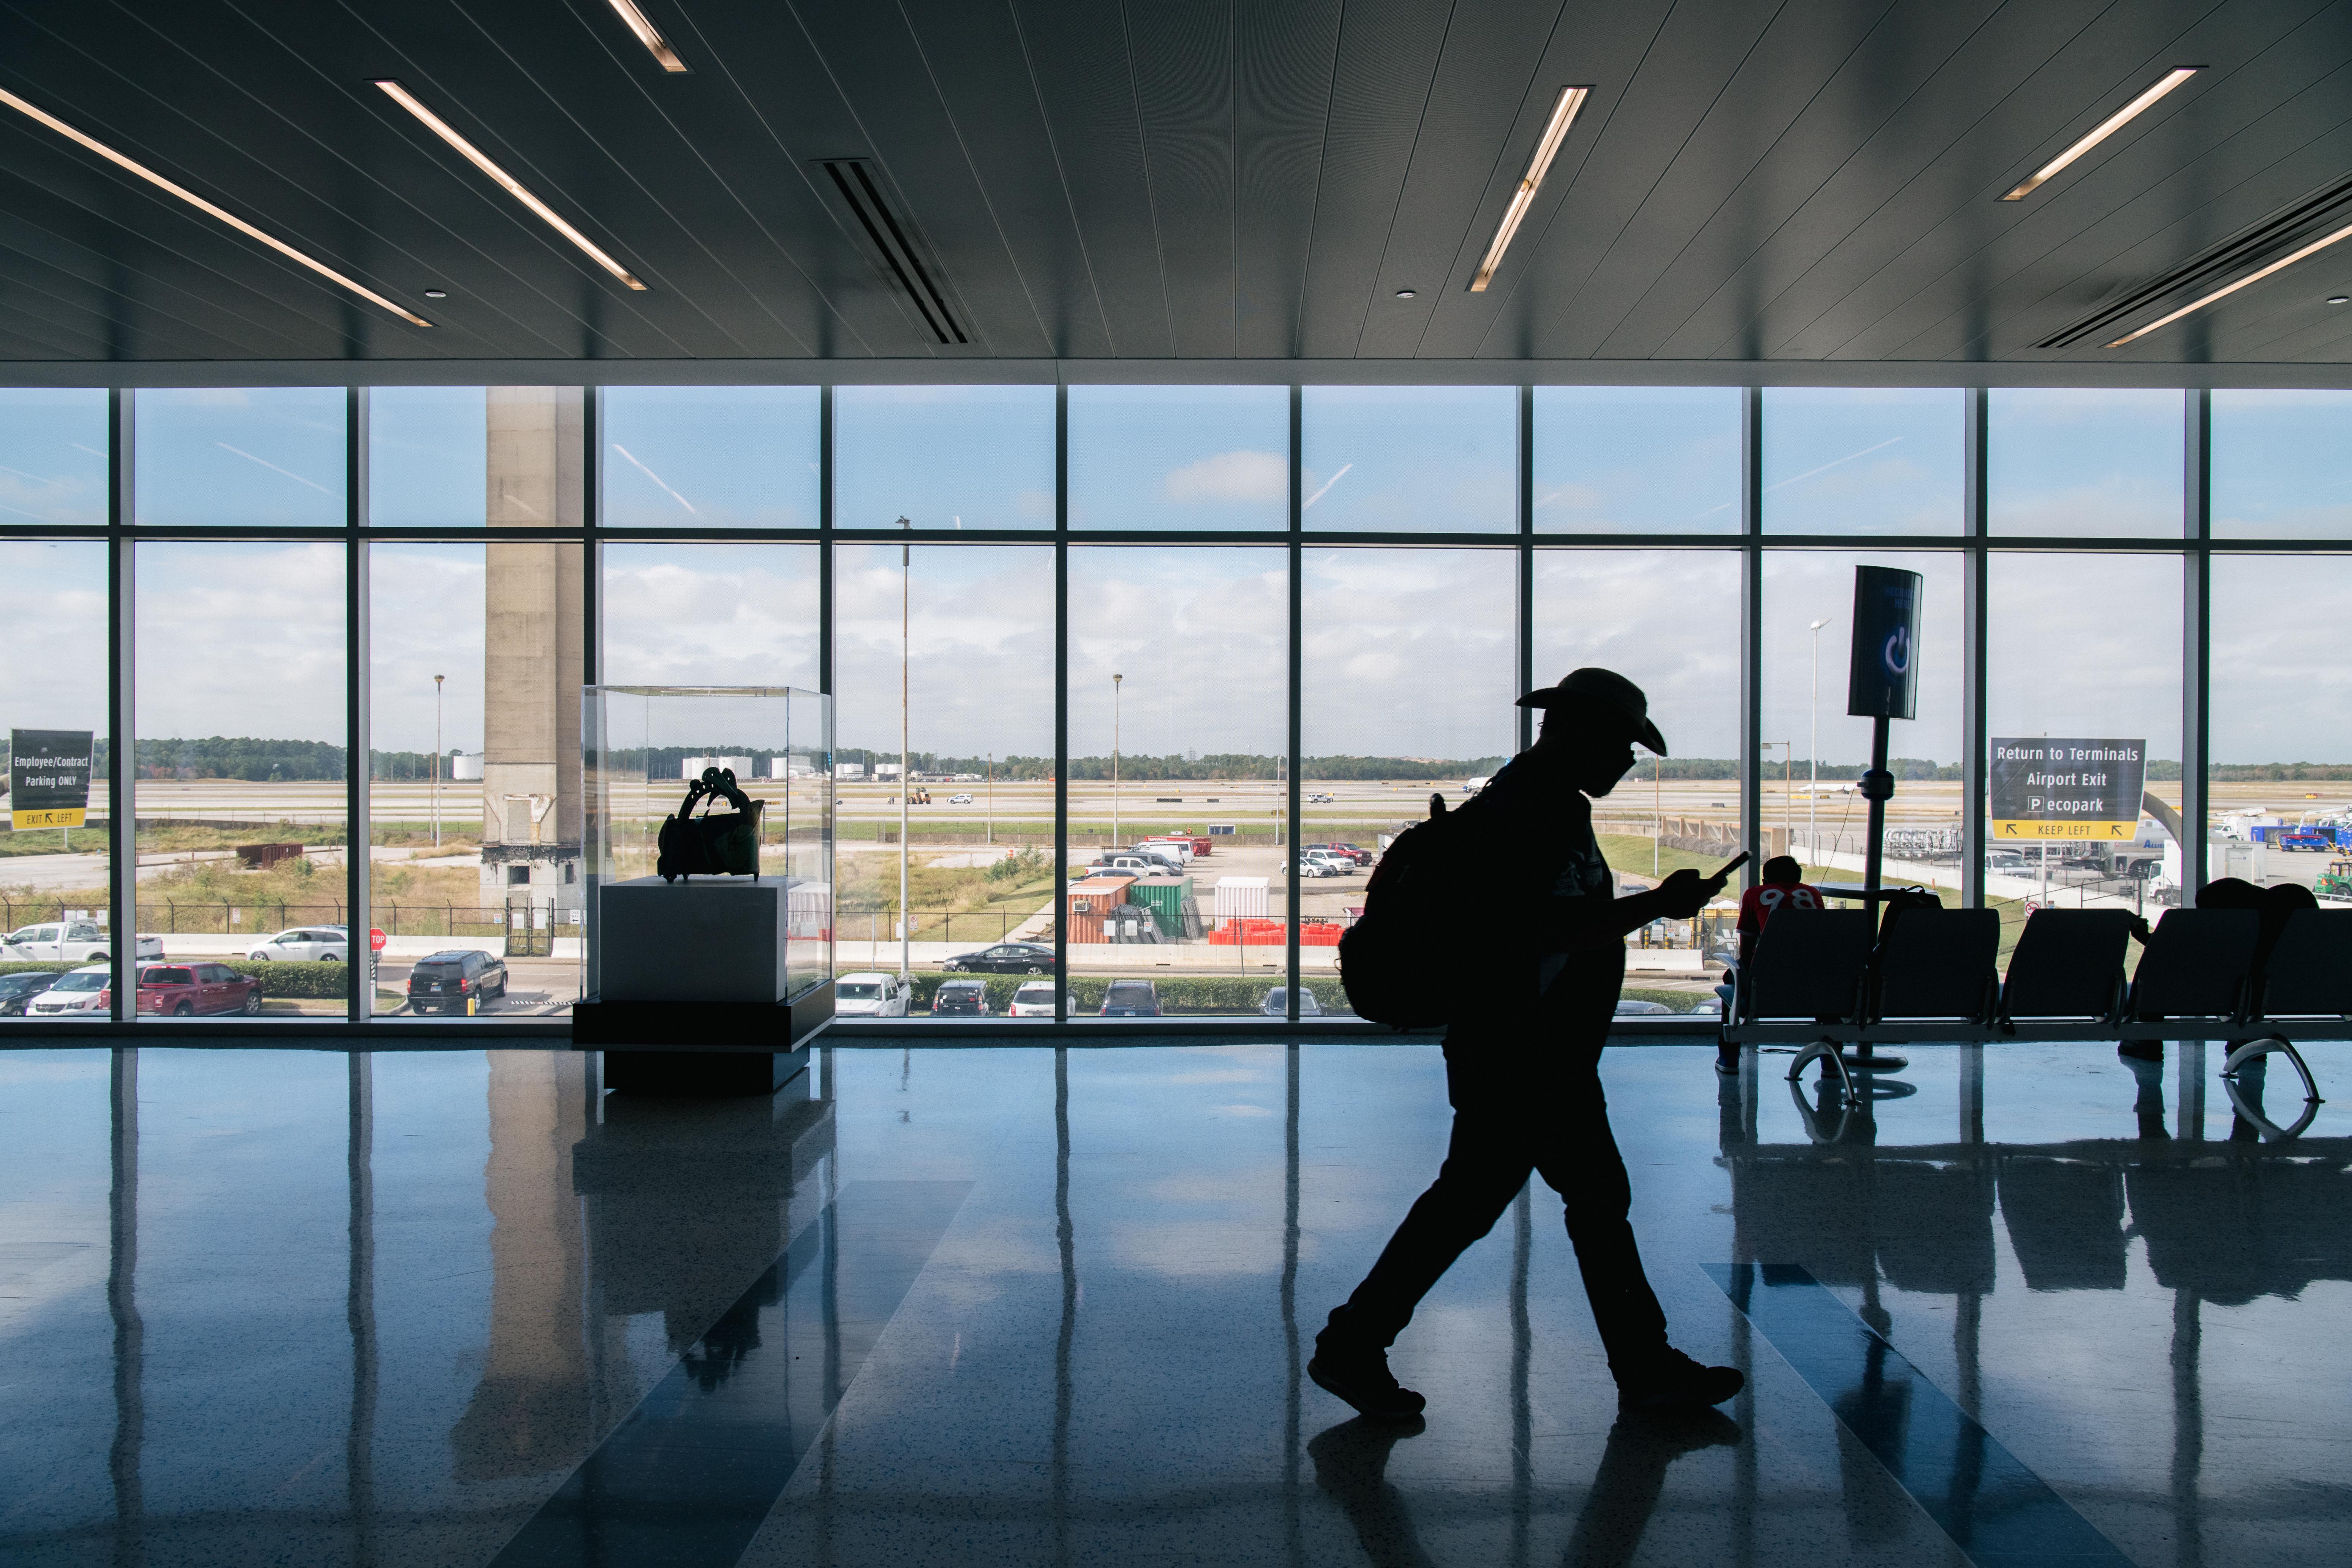 A person in silhouette walking through an airport